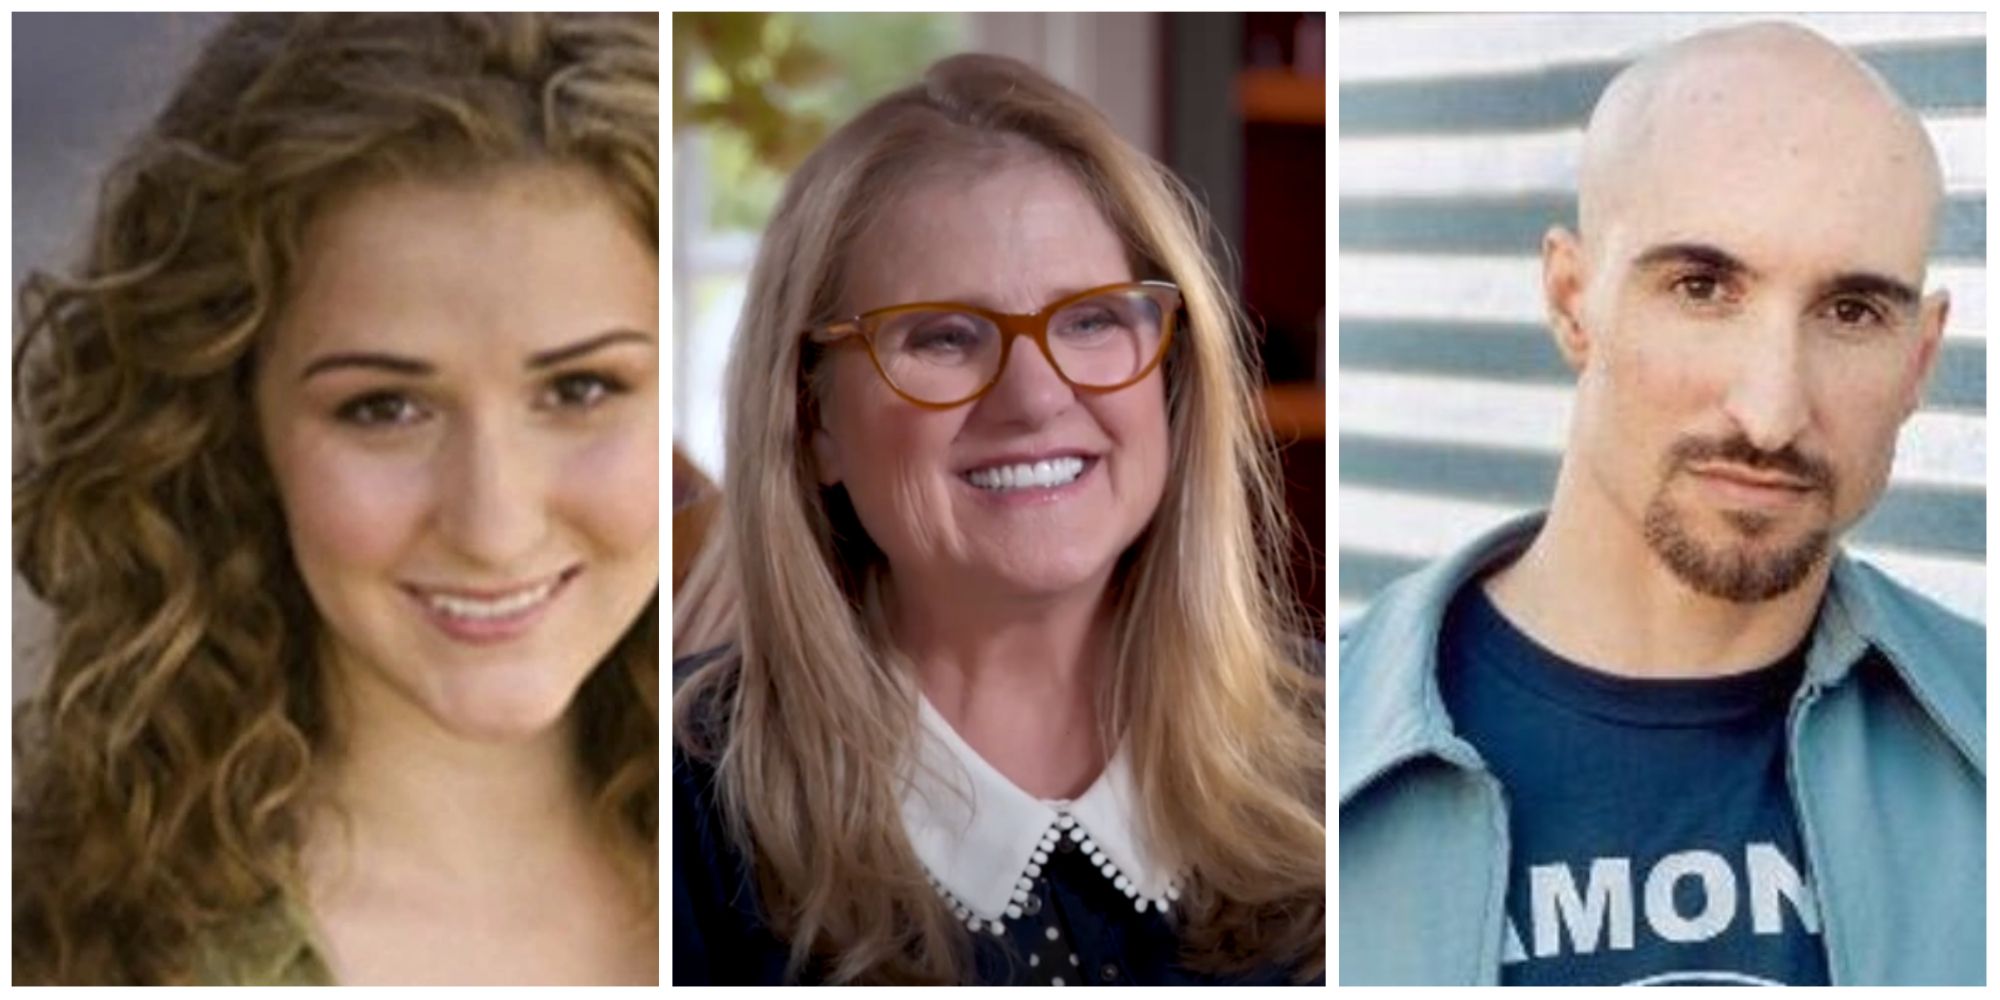 A split image featuring Francesca Smith, Nancy Cartwright, and Scott Menville